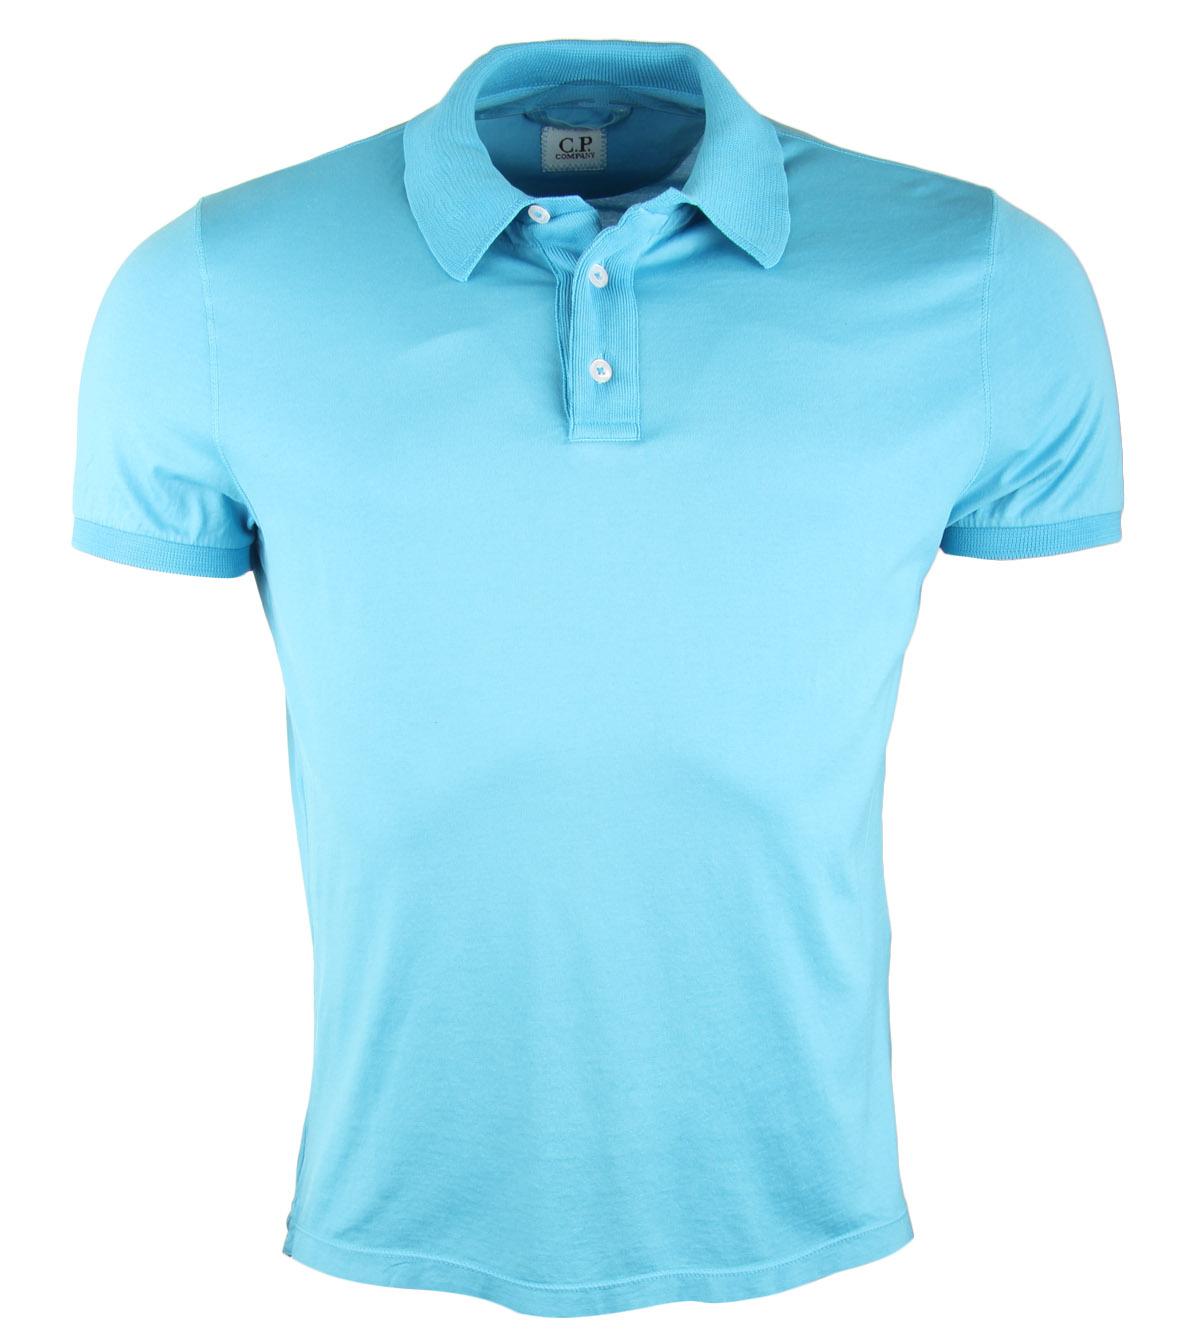 Foto CP Company Turquoise Jersey Polo Shirt-M